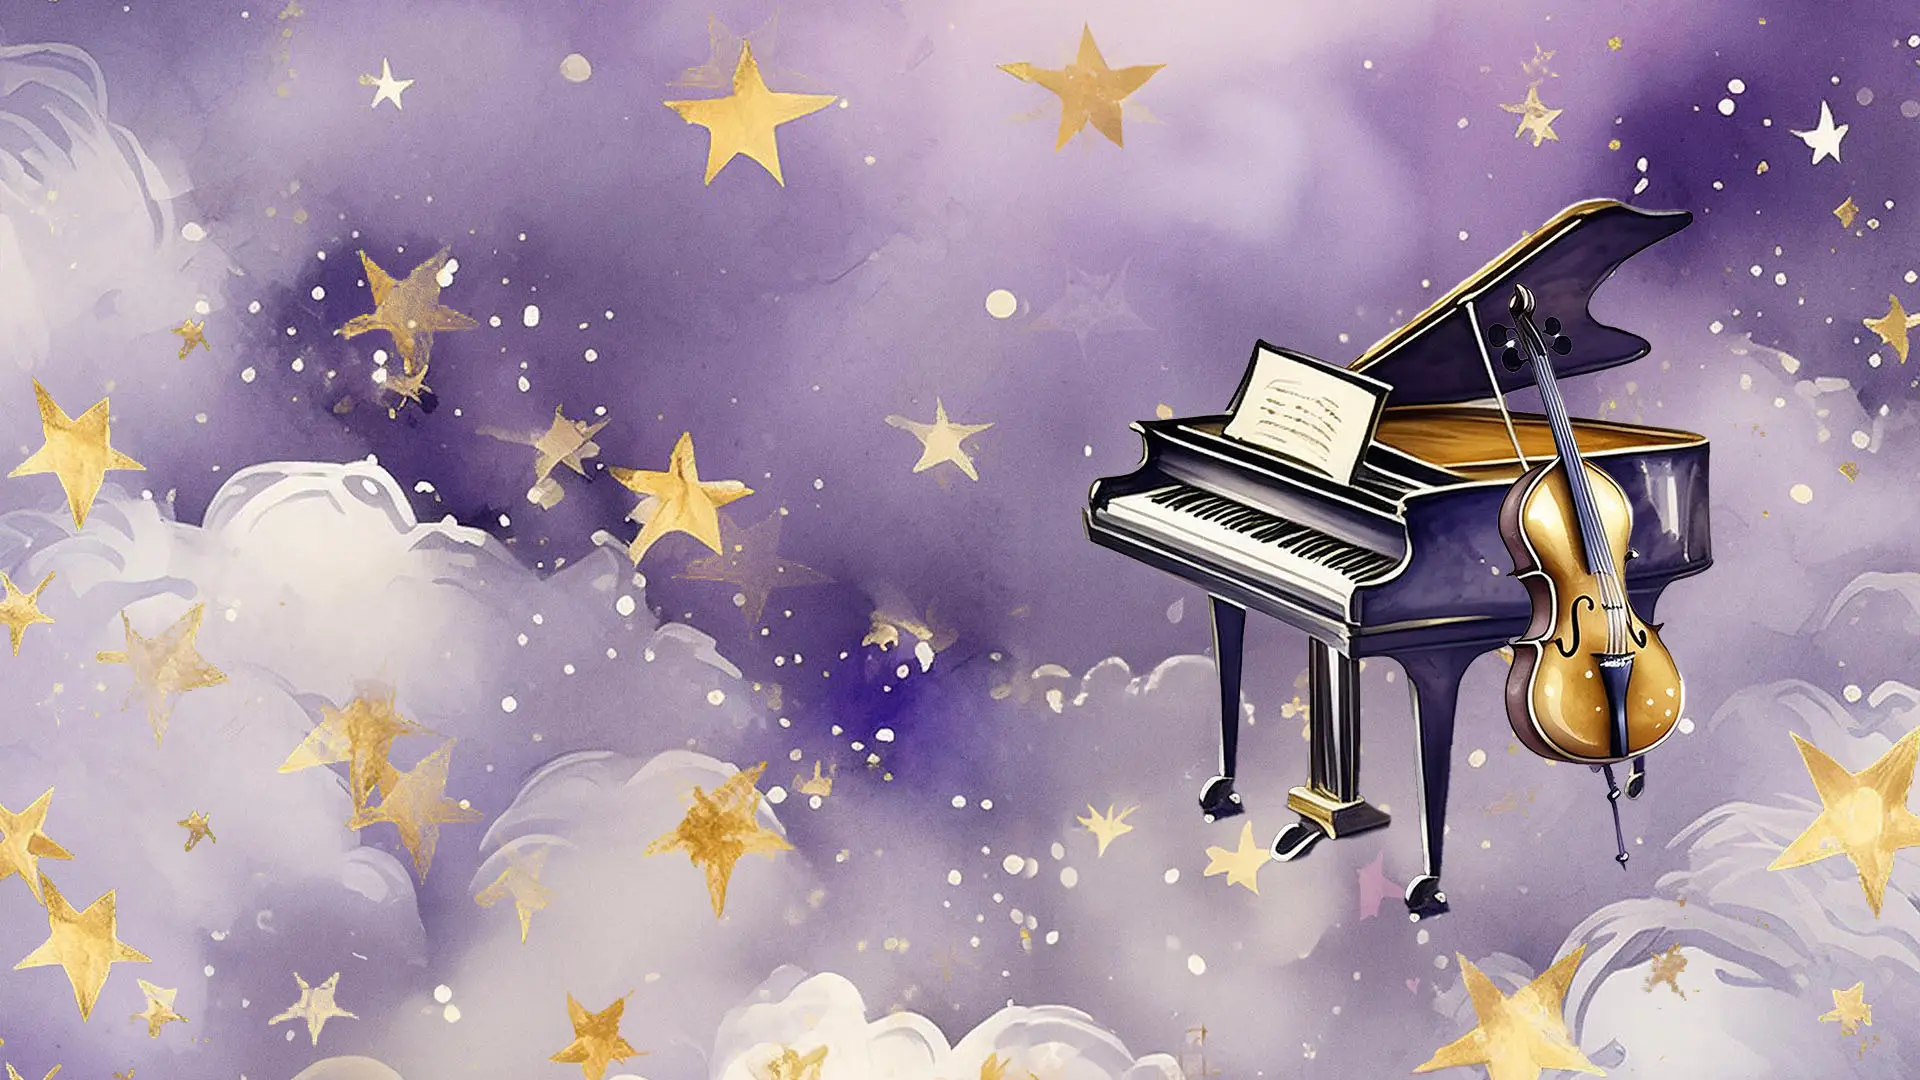 Piano & violin over starry night clouds